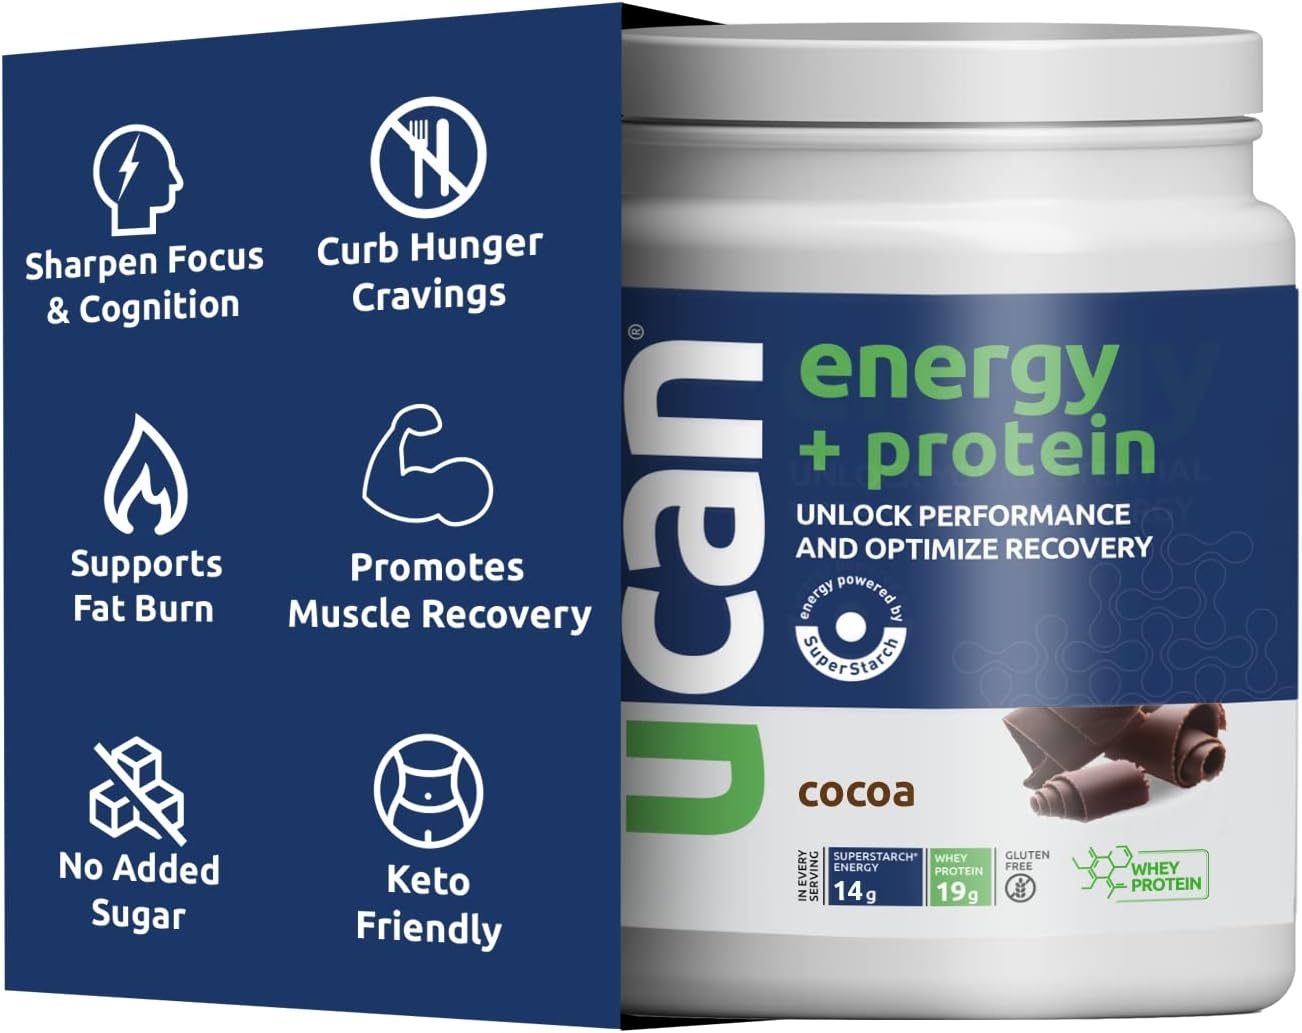 UCAN Energy + Whey Protein Powder (19g) - Pre & Post Protein Powder with Energy Boost - Keto, No Added Sugar, Gluten-Free - Cookies & Cream - 20 Servings